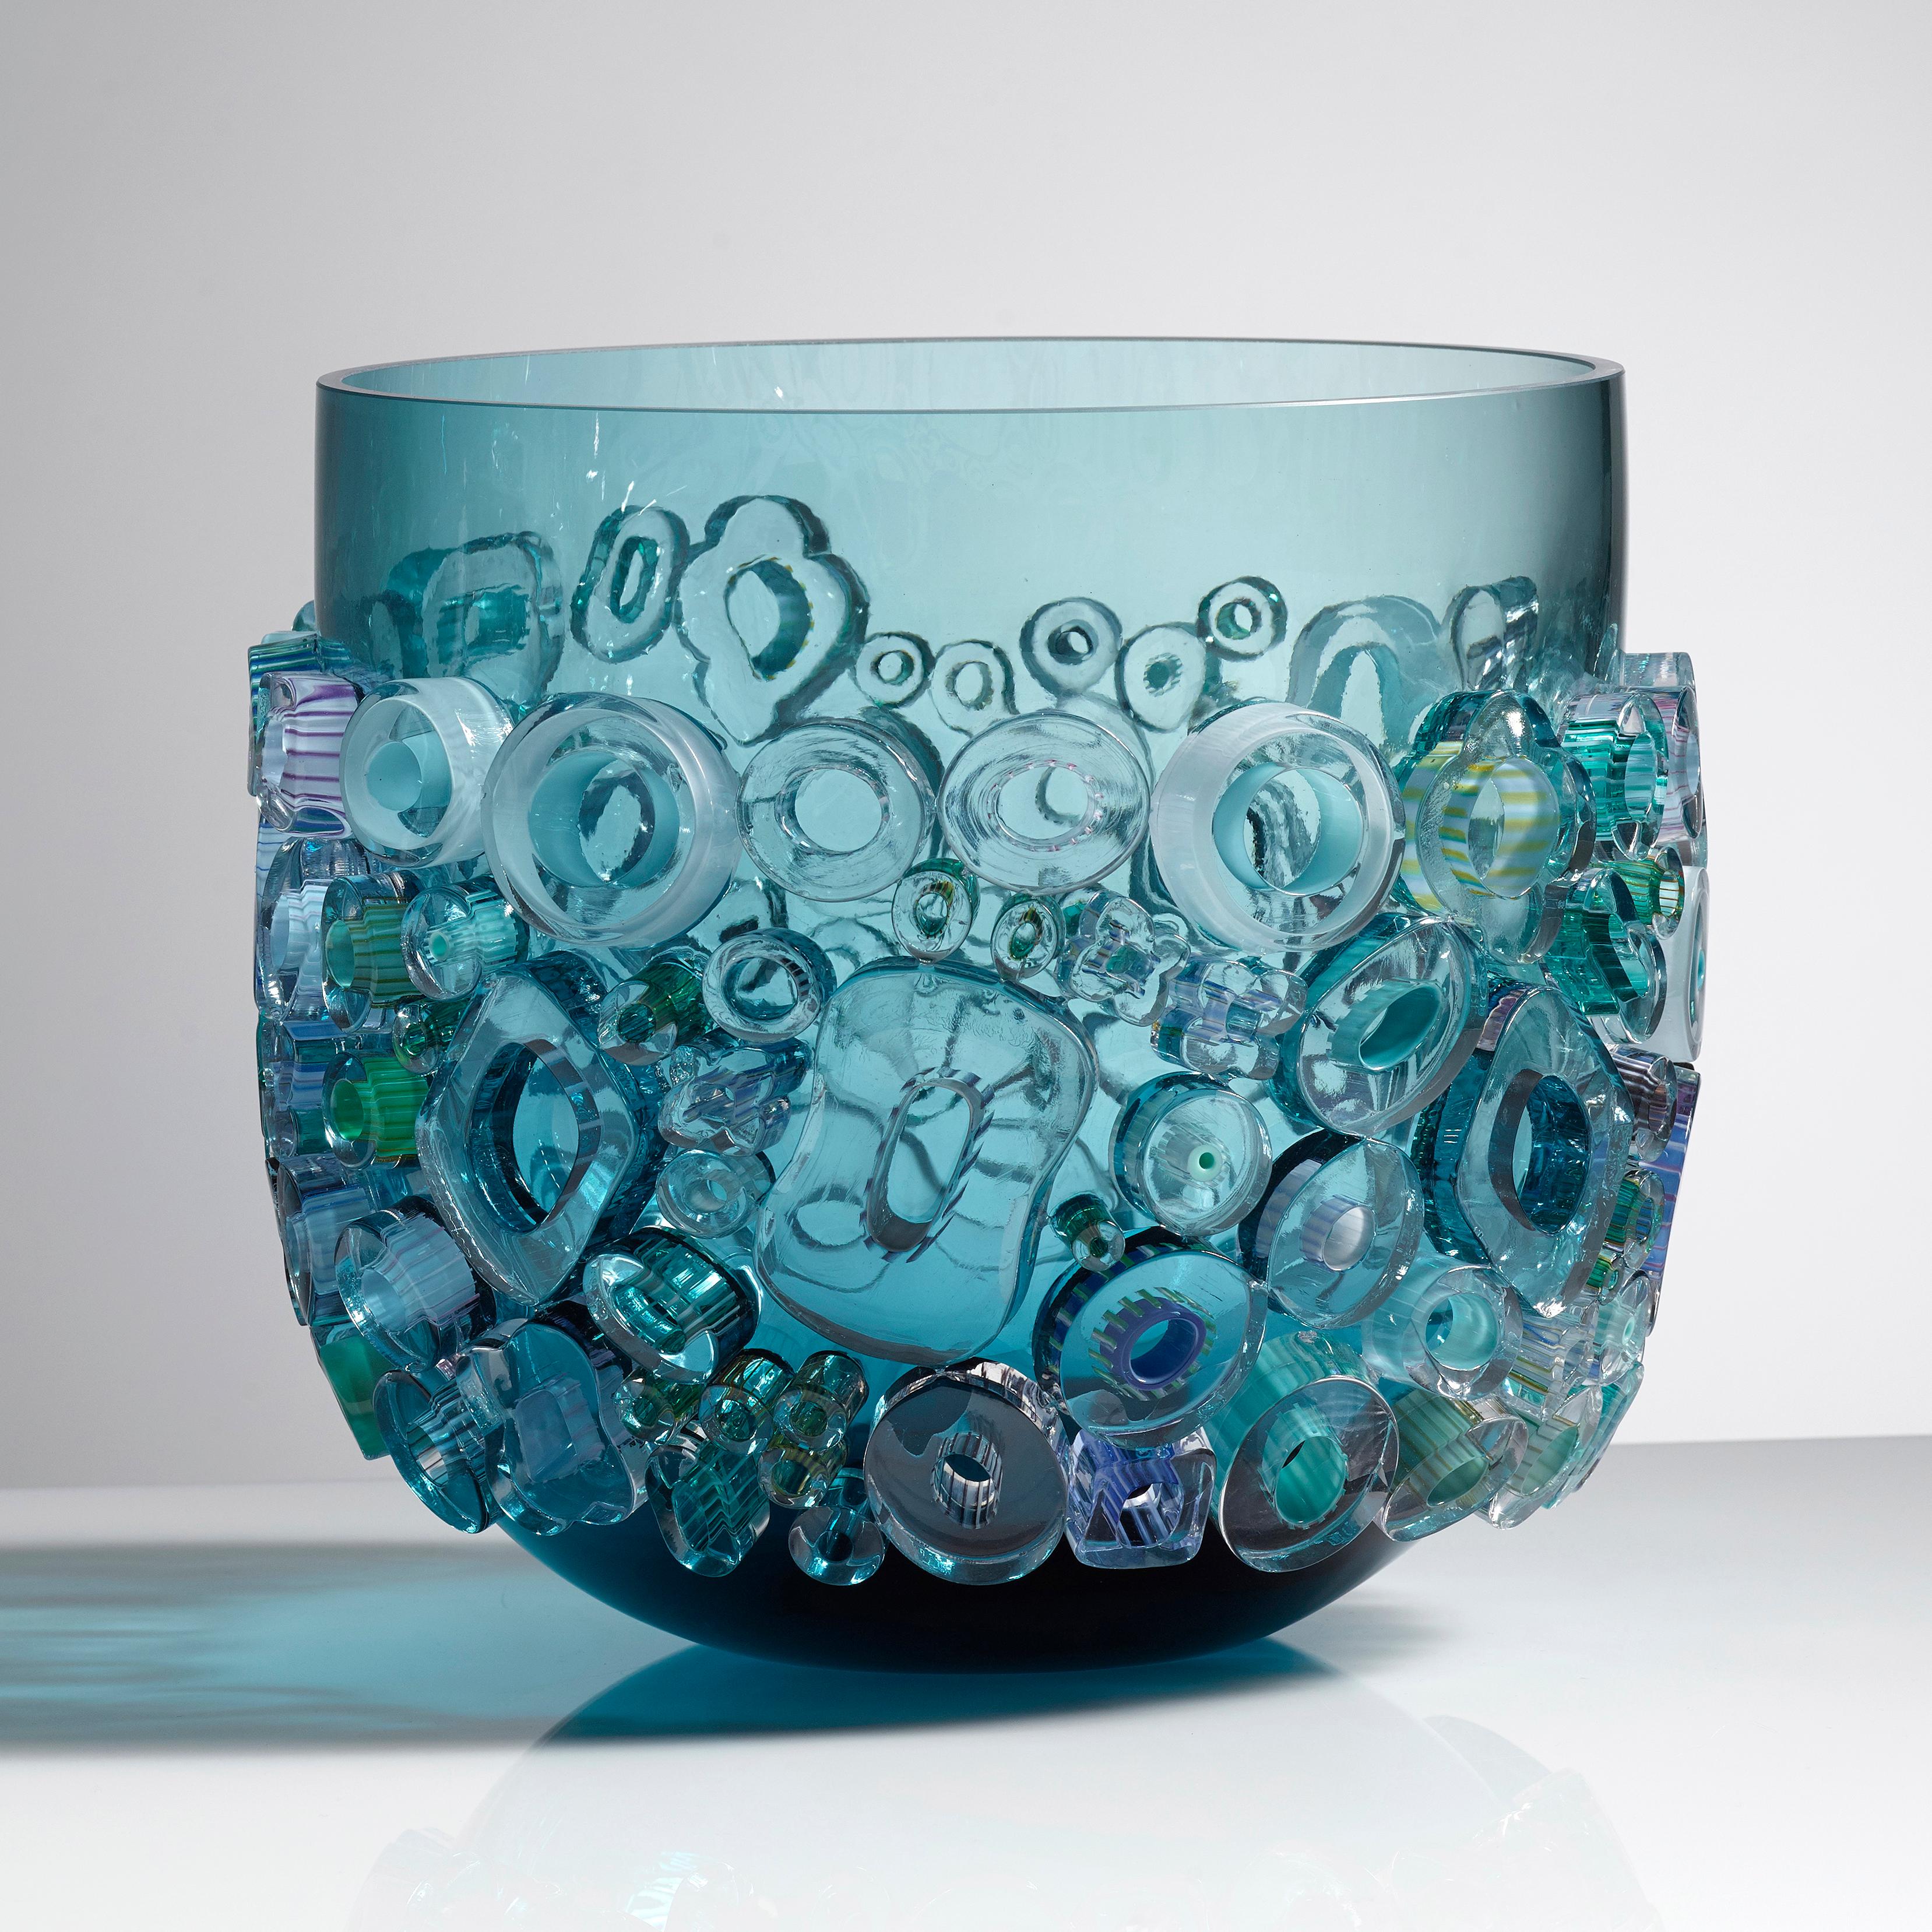 Common Ray in Aqua Light is a unique handblown and crafted vase & artwork / bowl / centrepiece by the German artist, Sabine Lintzen. The initial inner form is free-blown and adorned with various individually shaped murrini, all created in a mix of